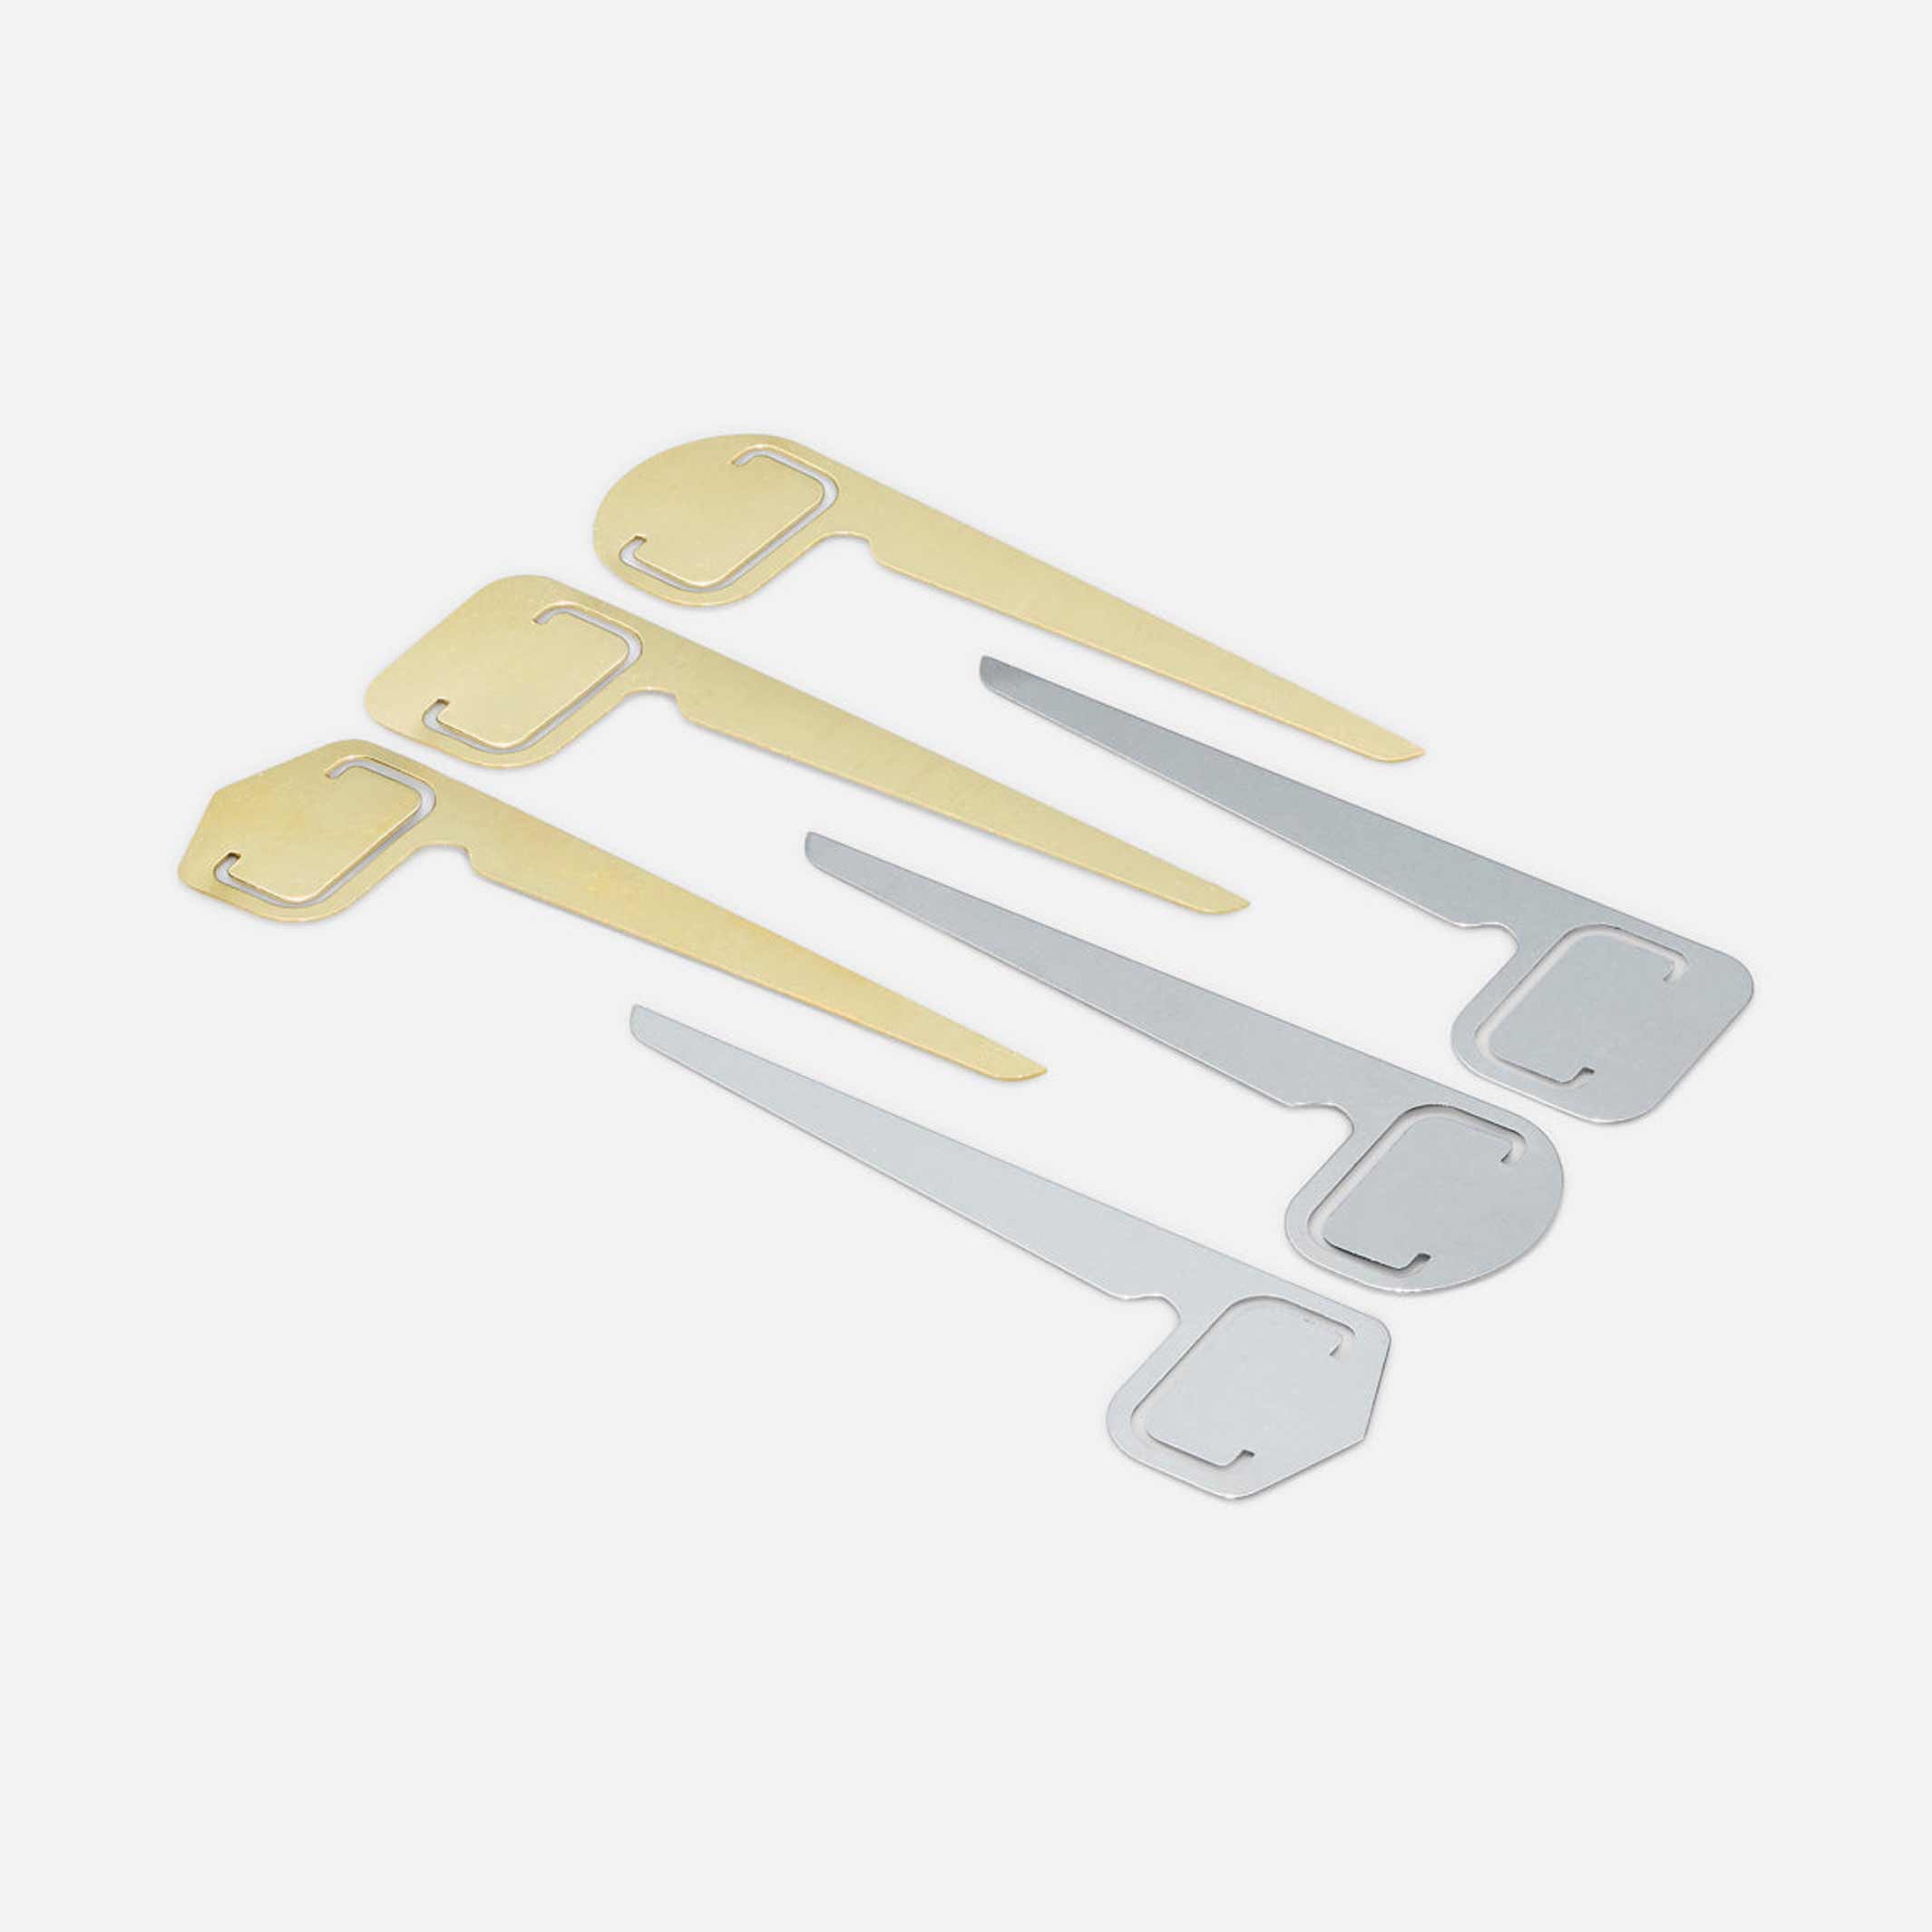 PAGE INDICATORS | Set of 6 brass & stainless BOOKMARKS | Craighill